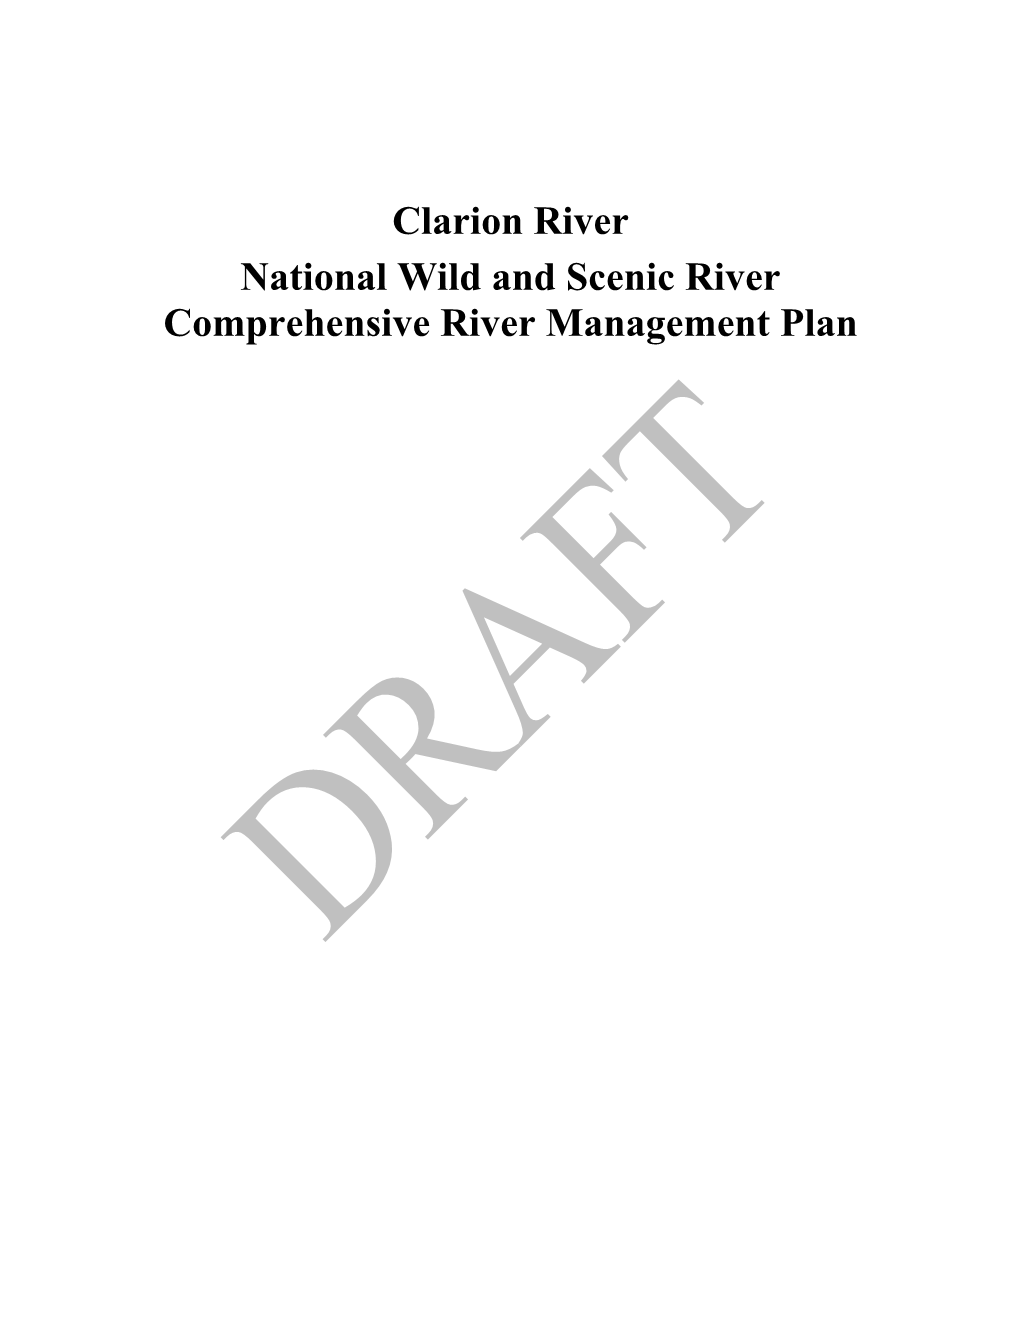 Clarion River National Wild and Scenic River Comprehensive River Management Plan